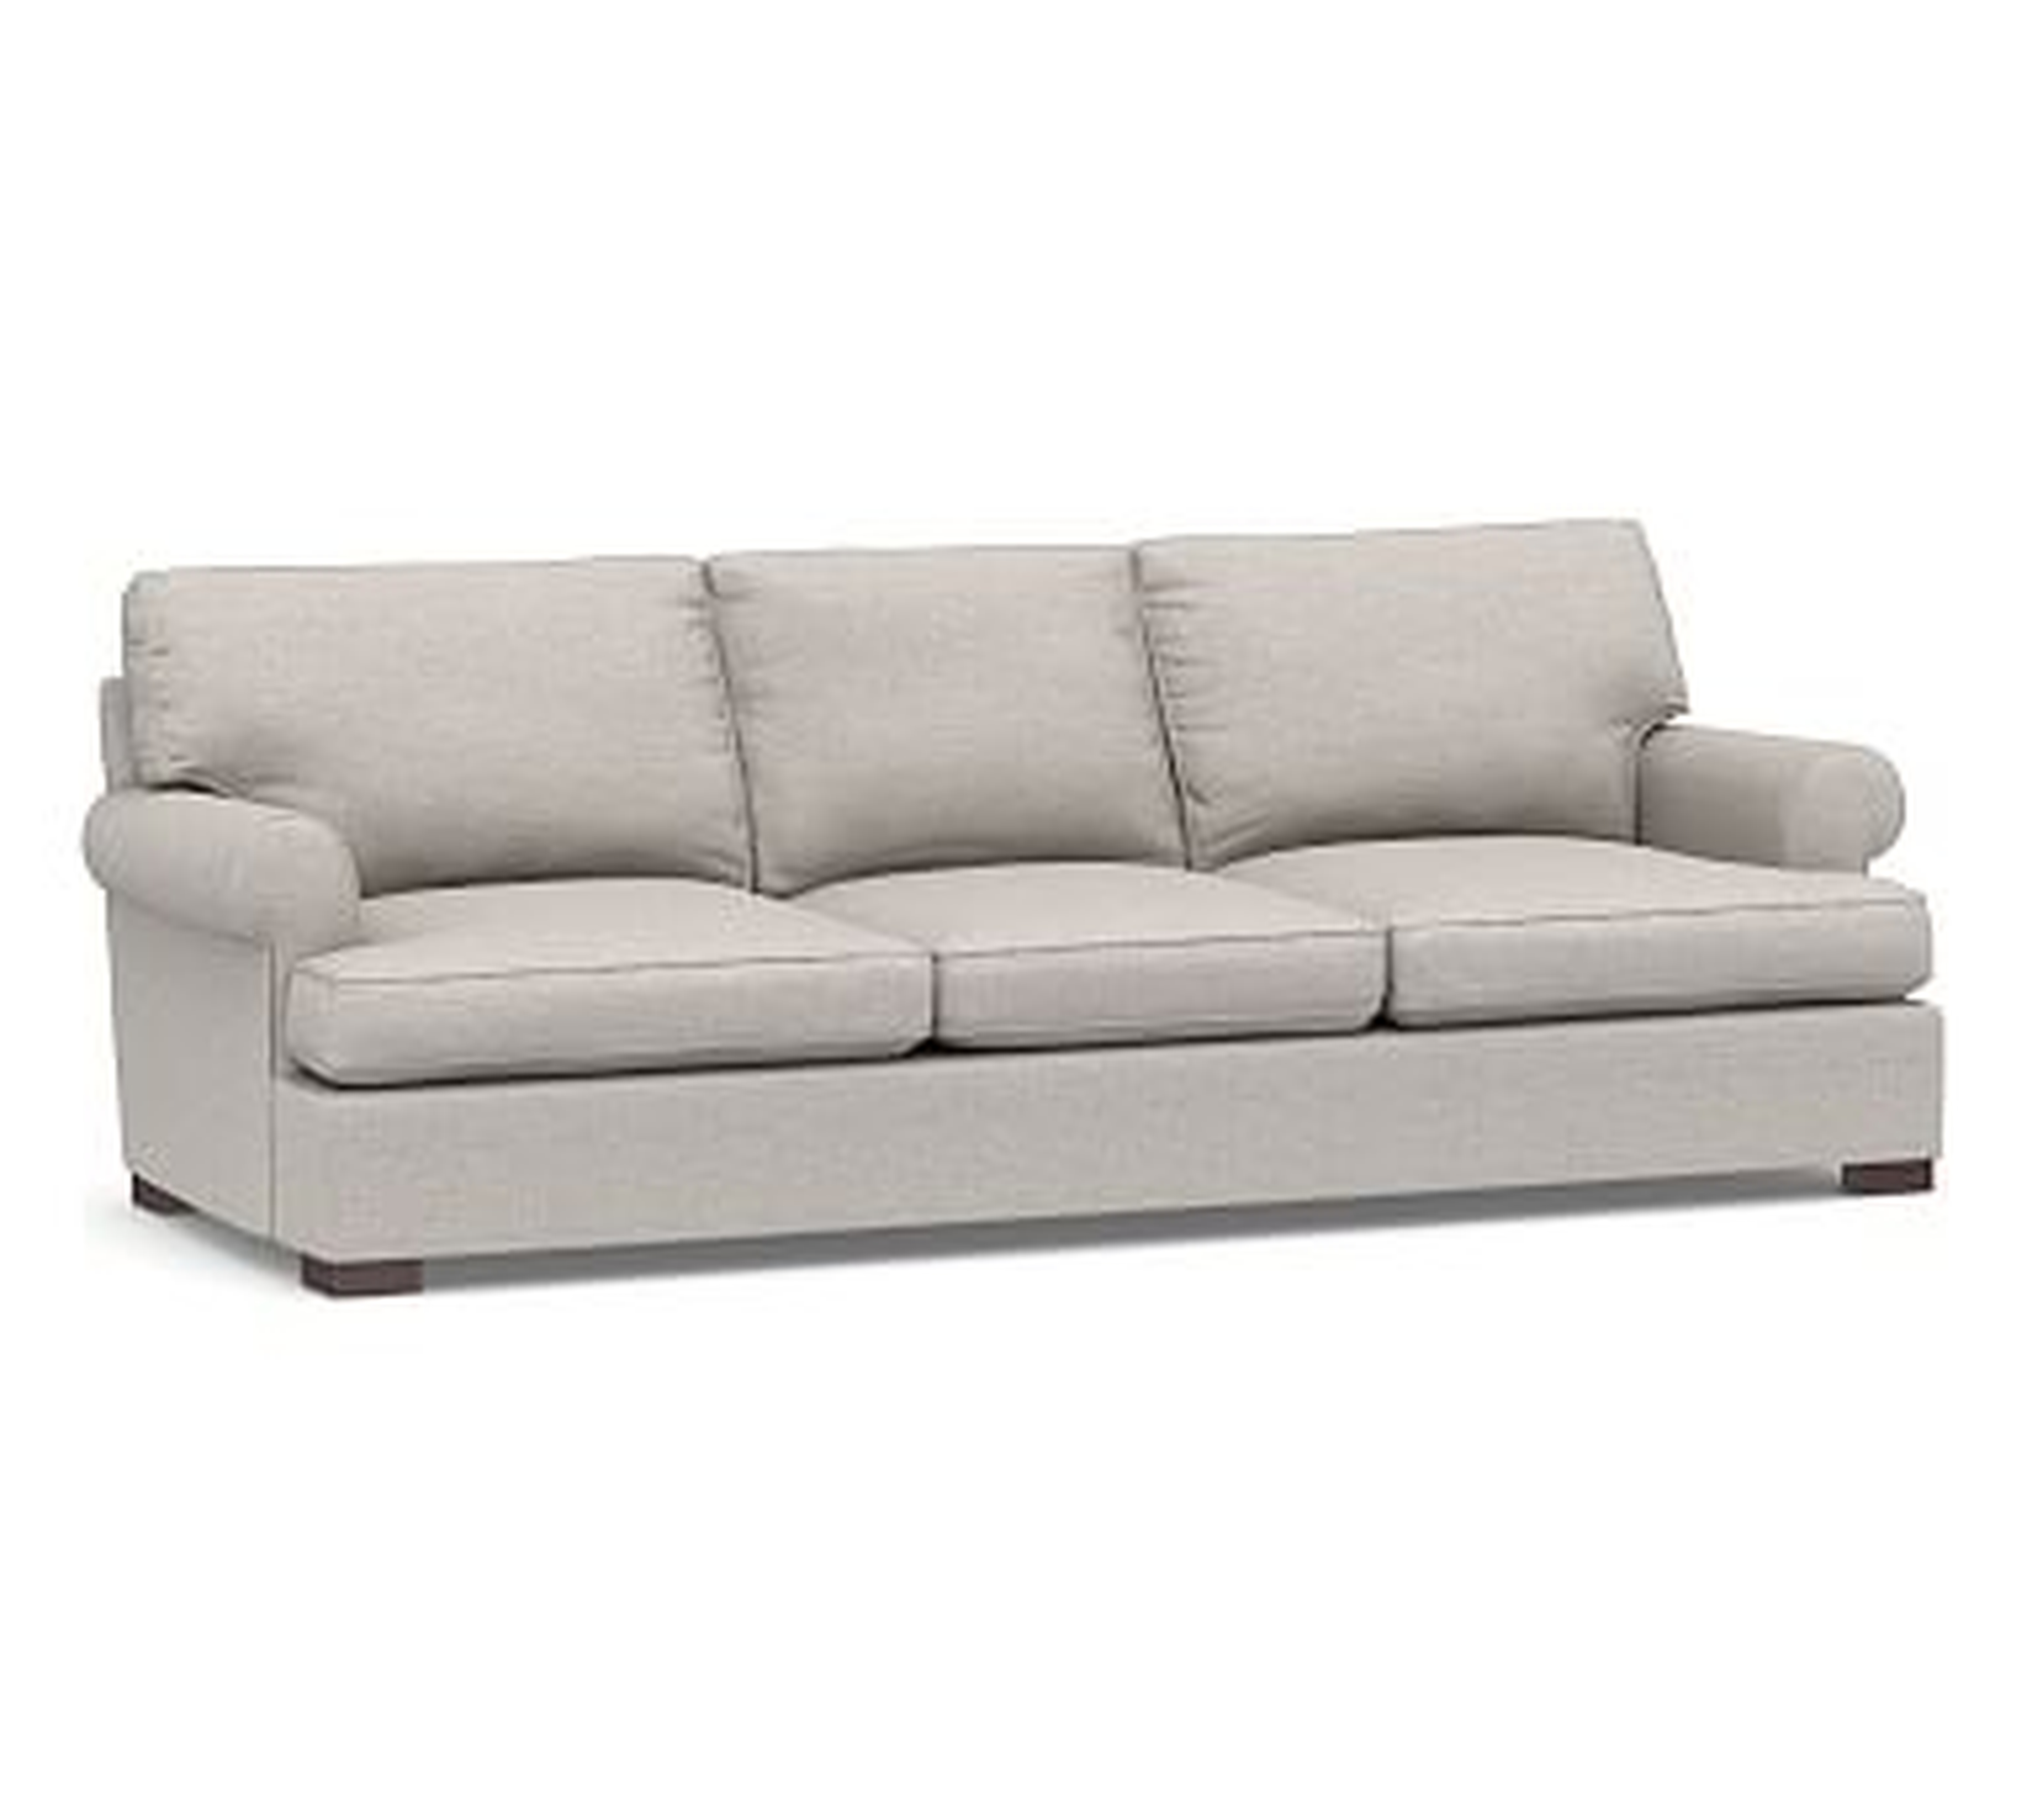 Townsend Roll Arm Upholstered Grand Sofa 101.5", Polyester Wrapped Cushions, Heathered Twill Stone - Pottery Barn